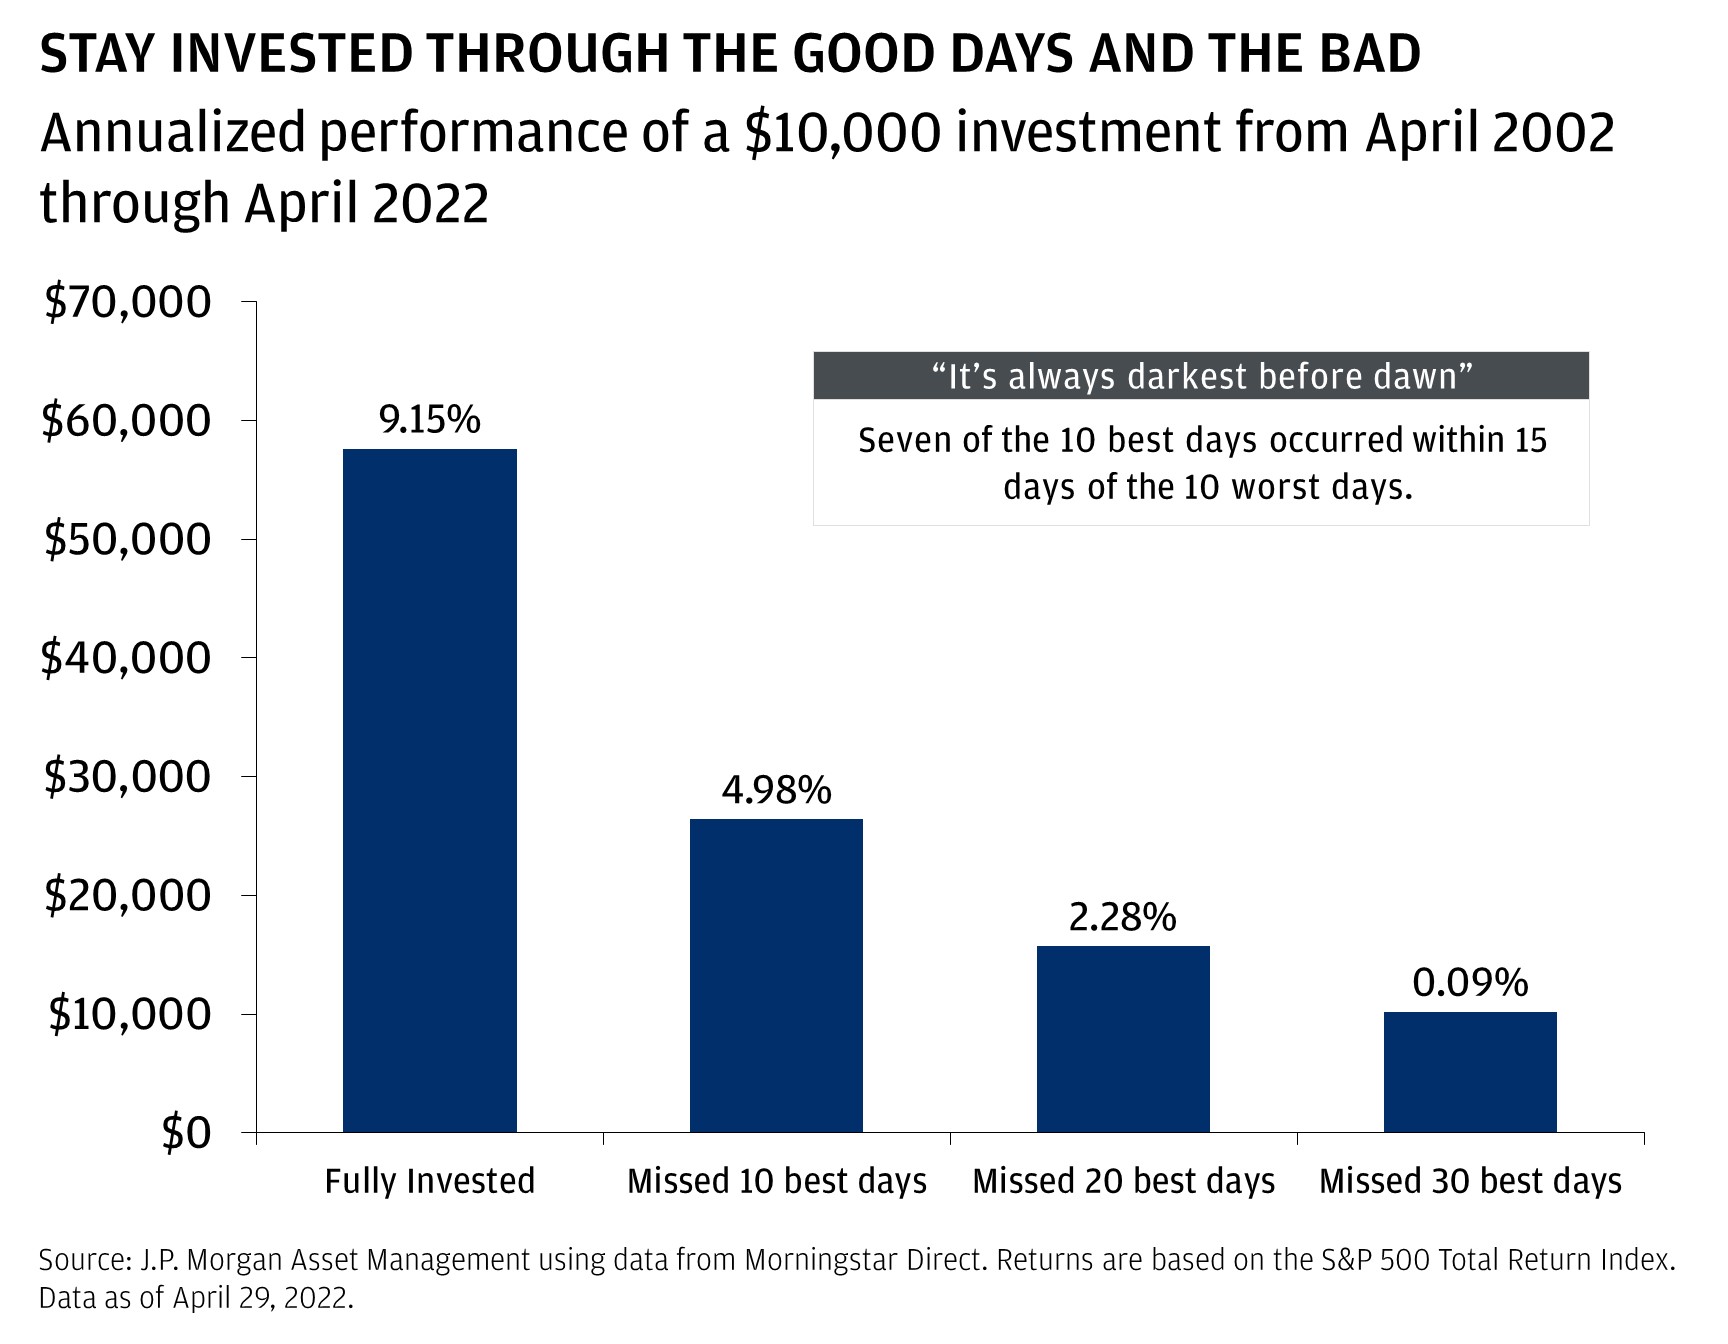 This chart shows the annualized performance of a $10,000 investment from April 2002 through April 2022.